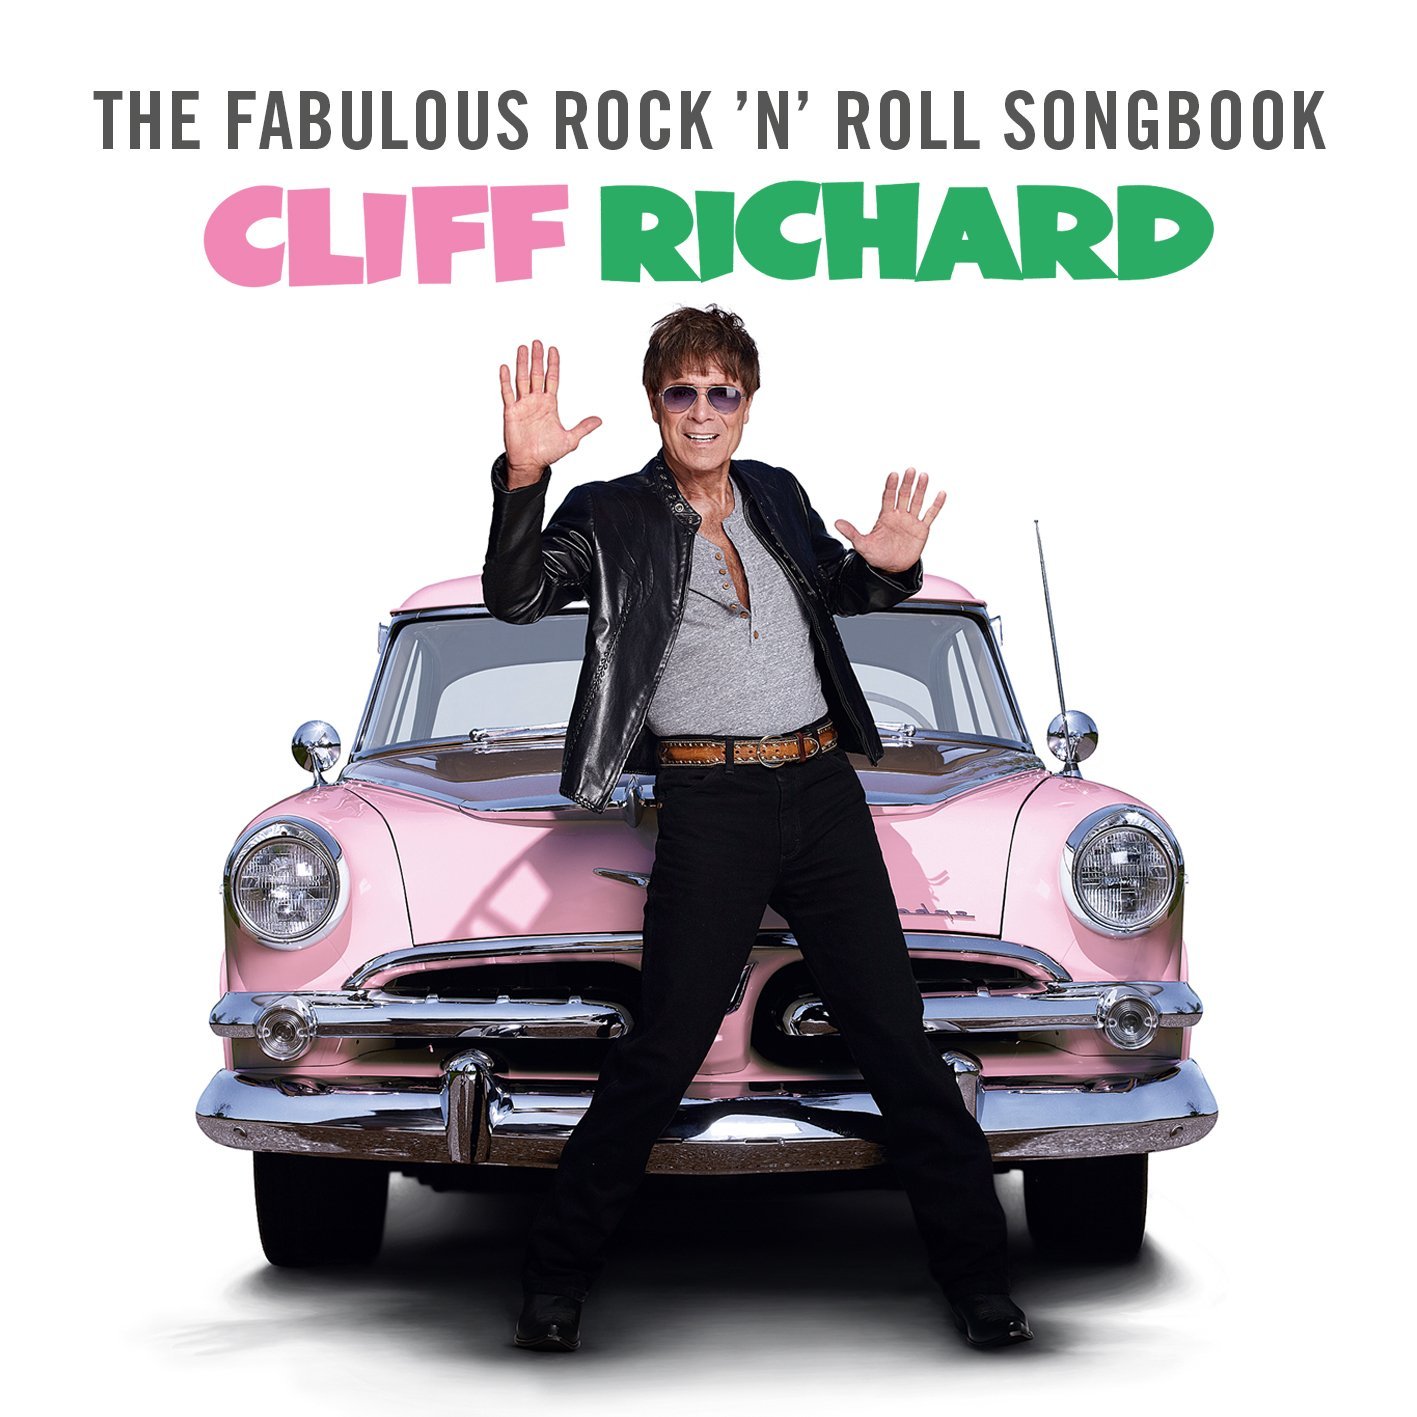 Cliff Richard The Fabulous Rock 'n' Roll Songbook (2013)